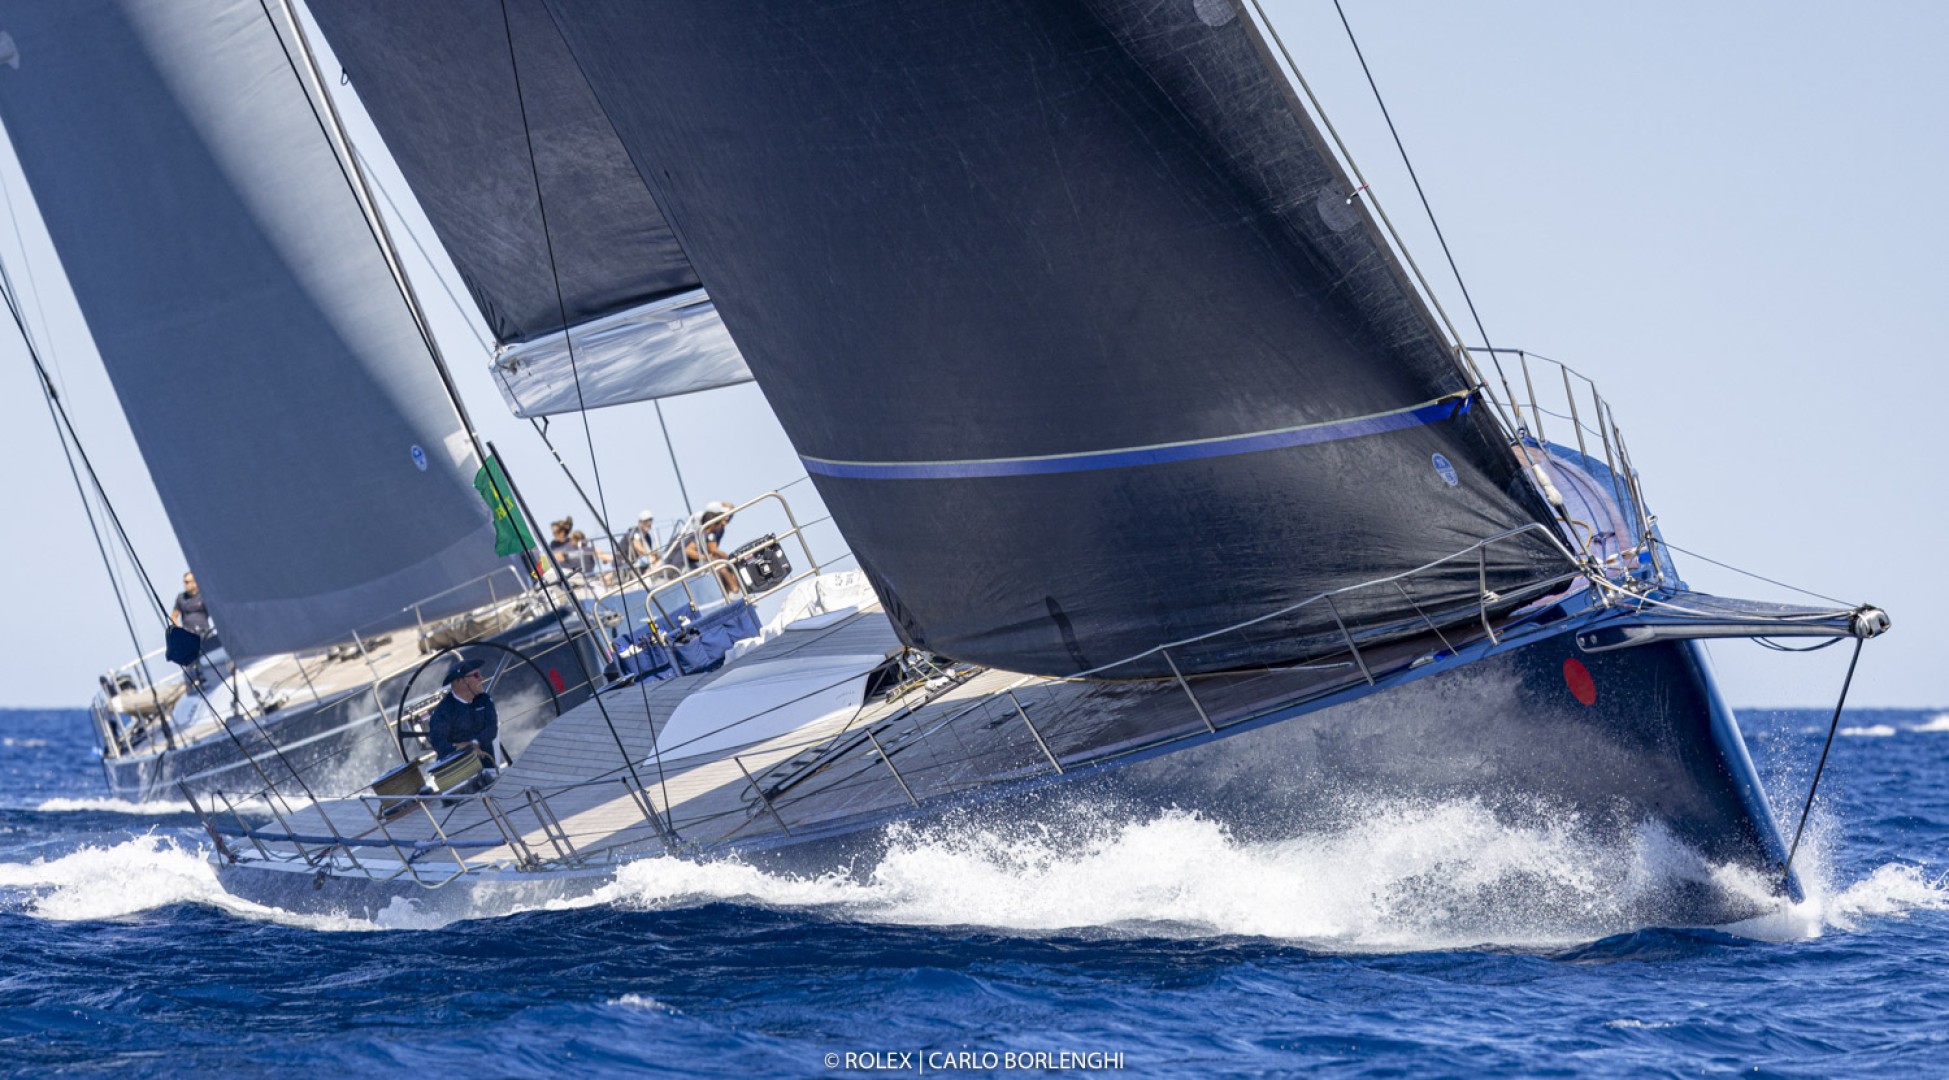 Sir Lindsay Owen-Jones, with his Magic Carpets, is one of the most capped Rolex Giraglia competitors.